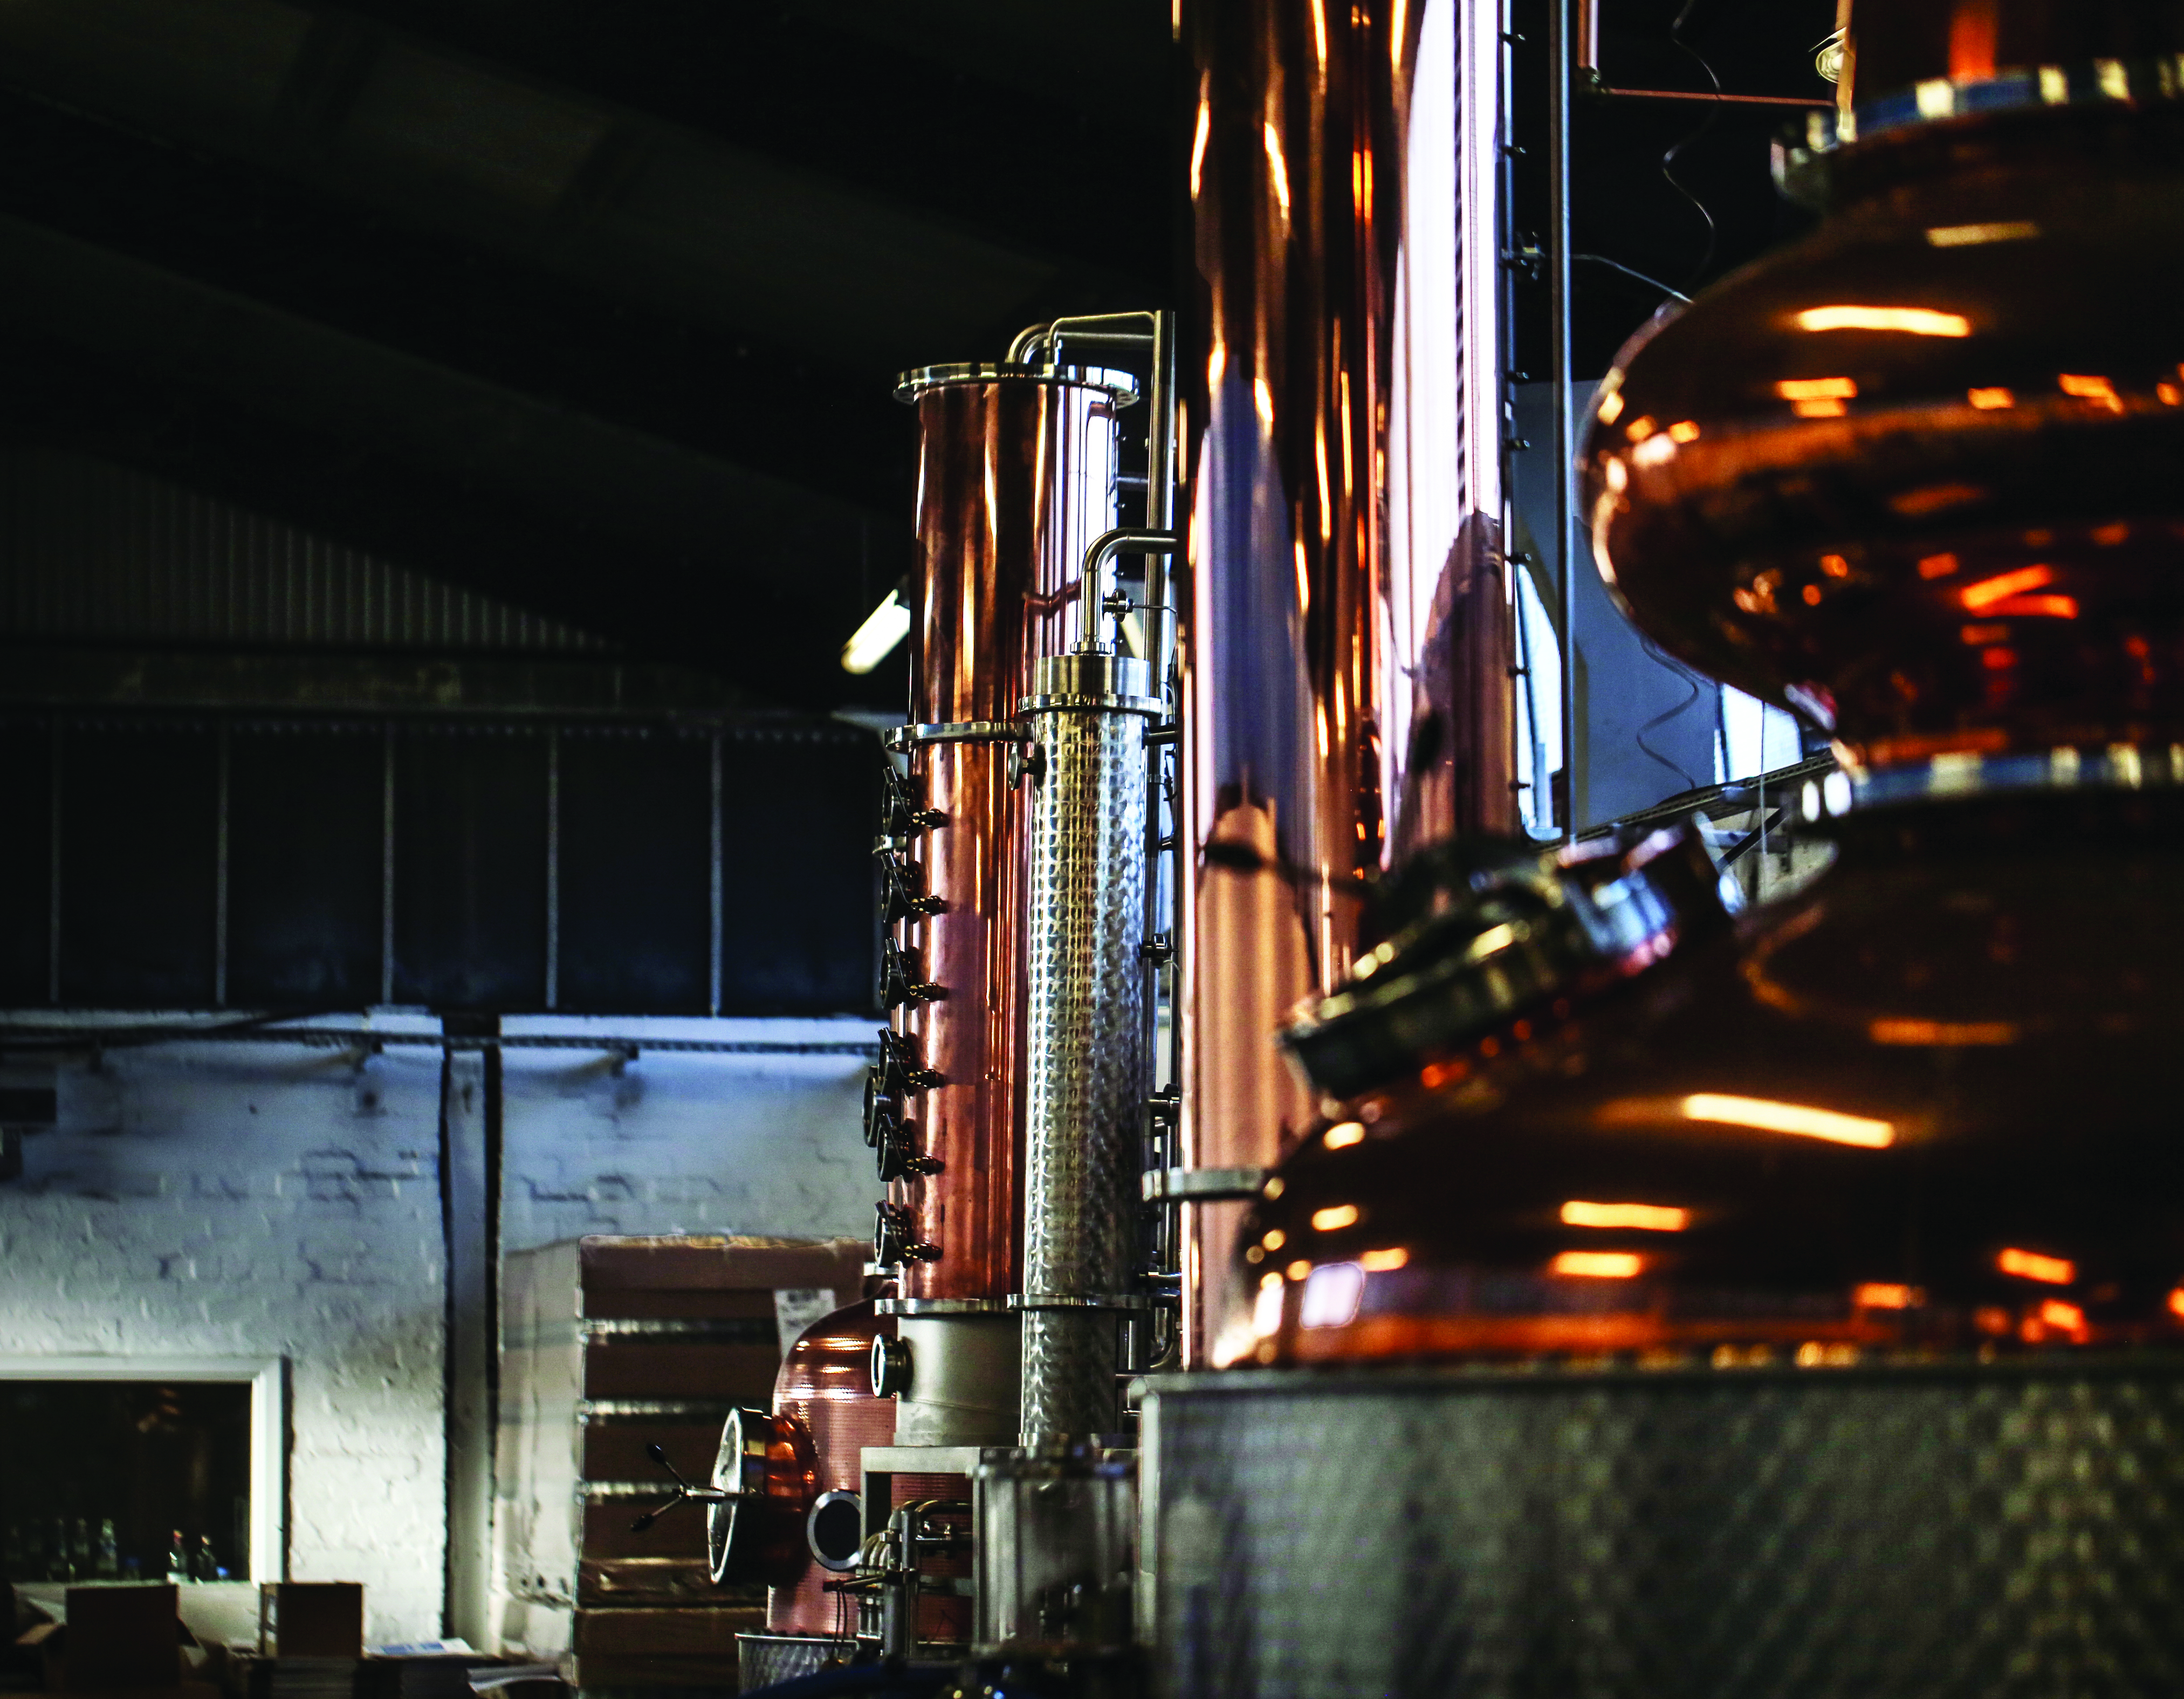 Whisky and Gin still